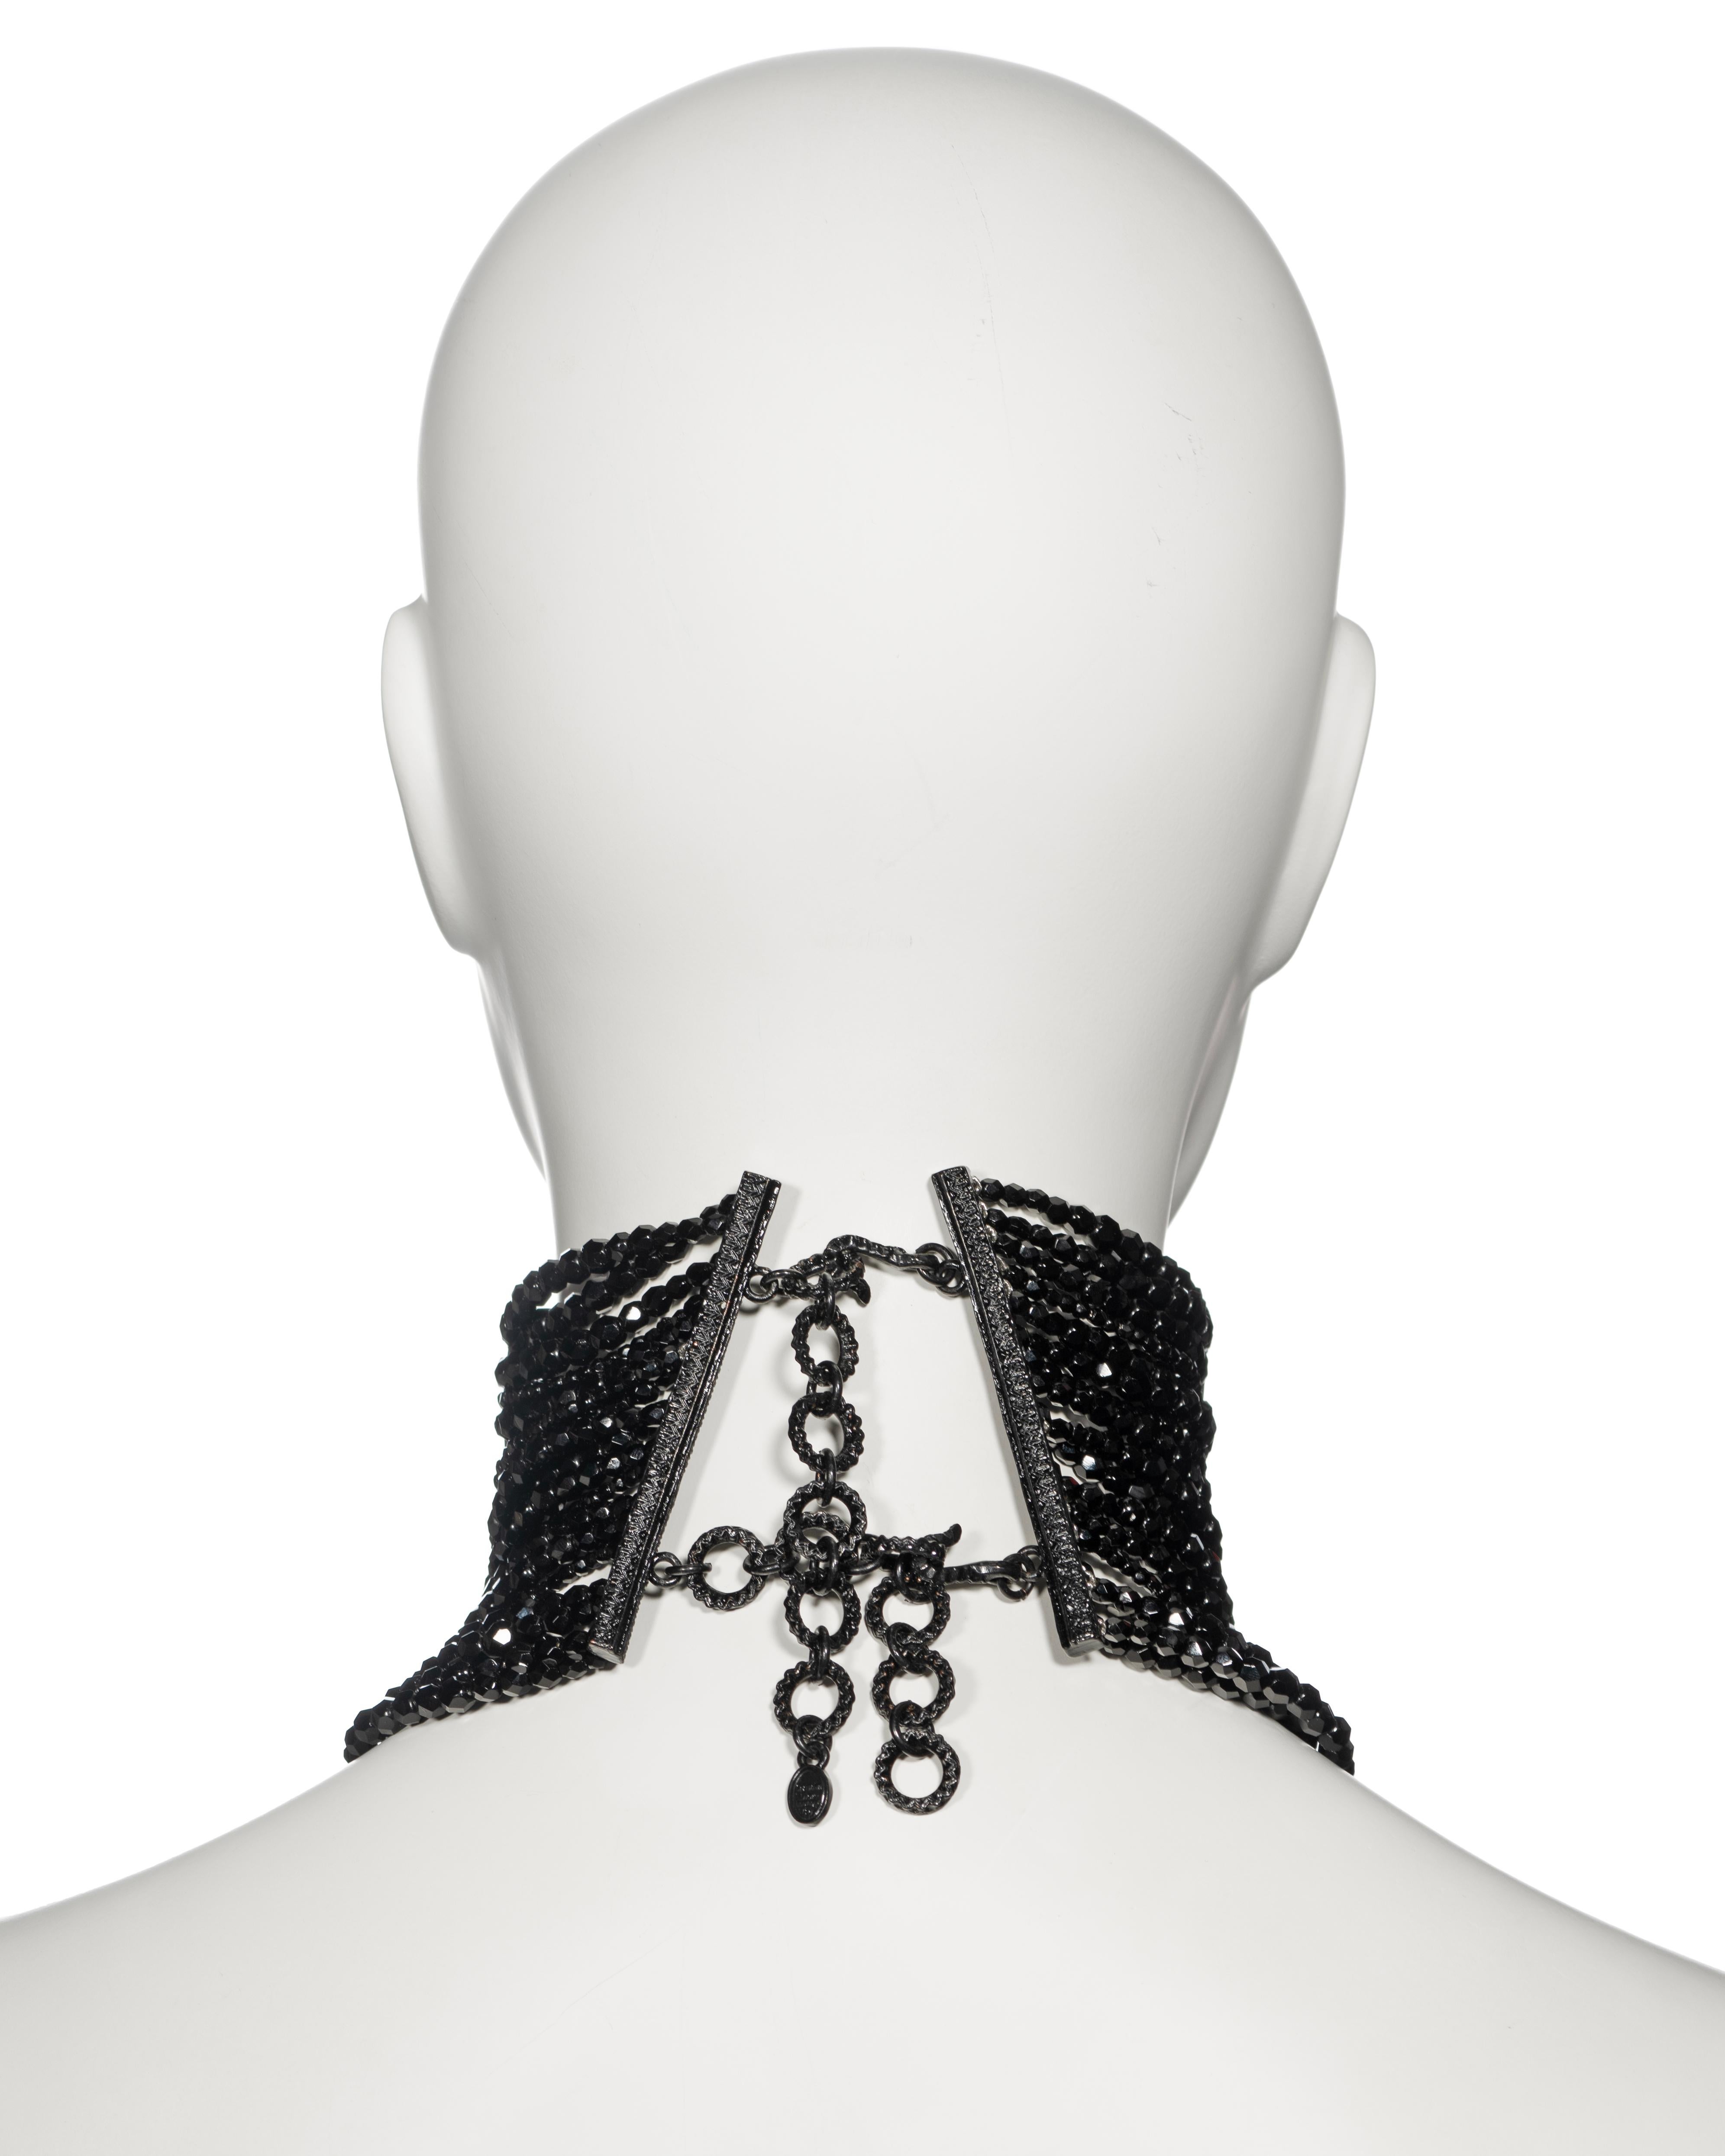 Christian Dior by John Galliano black beaded Masai choker necklace, ss 1999 For Sale 9